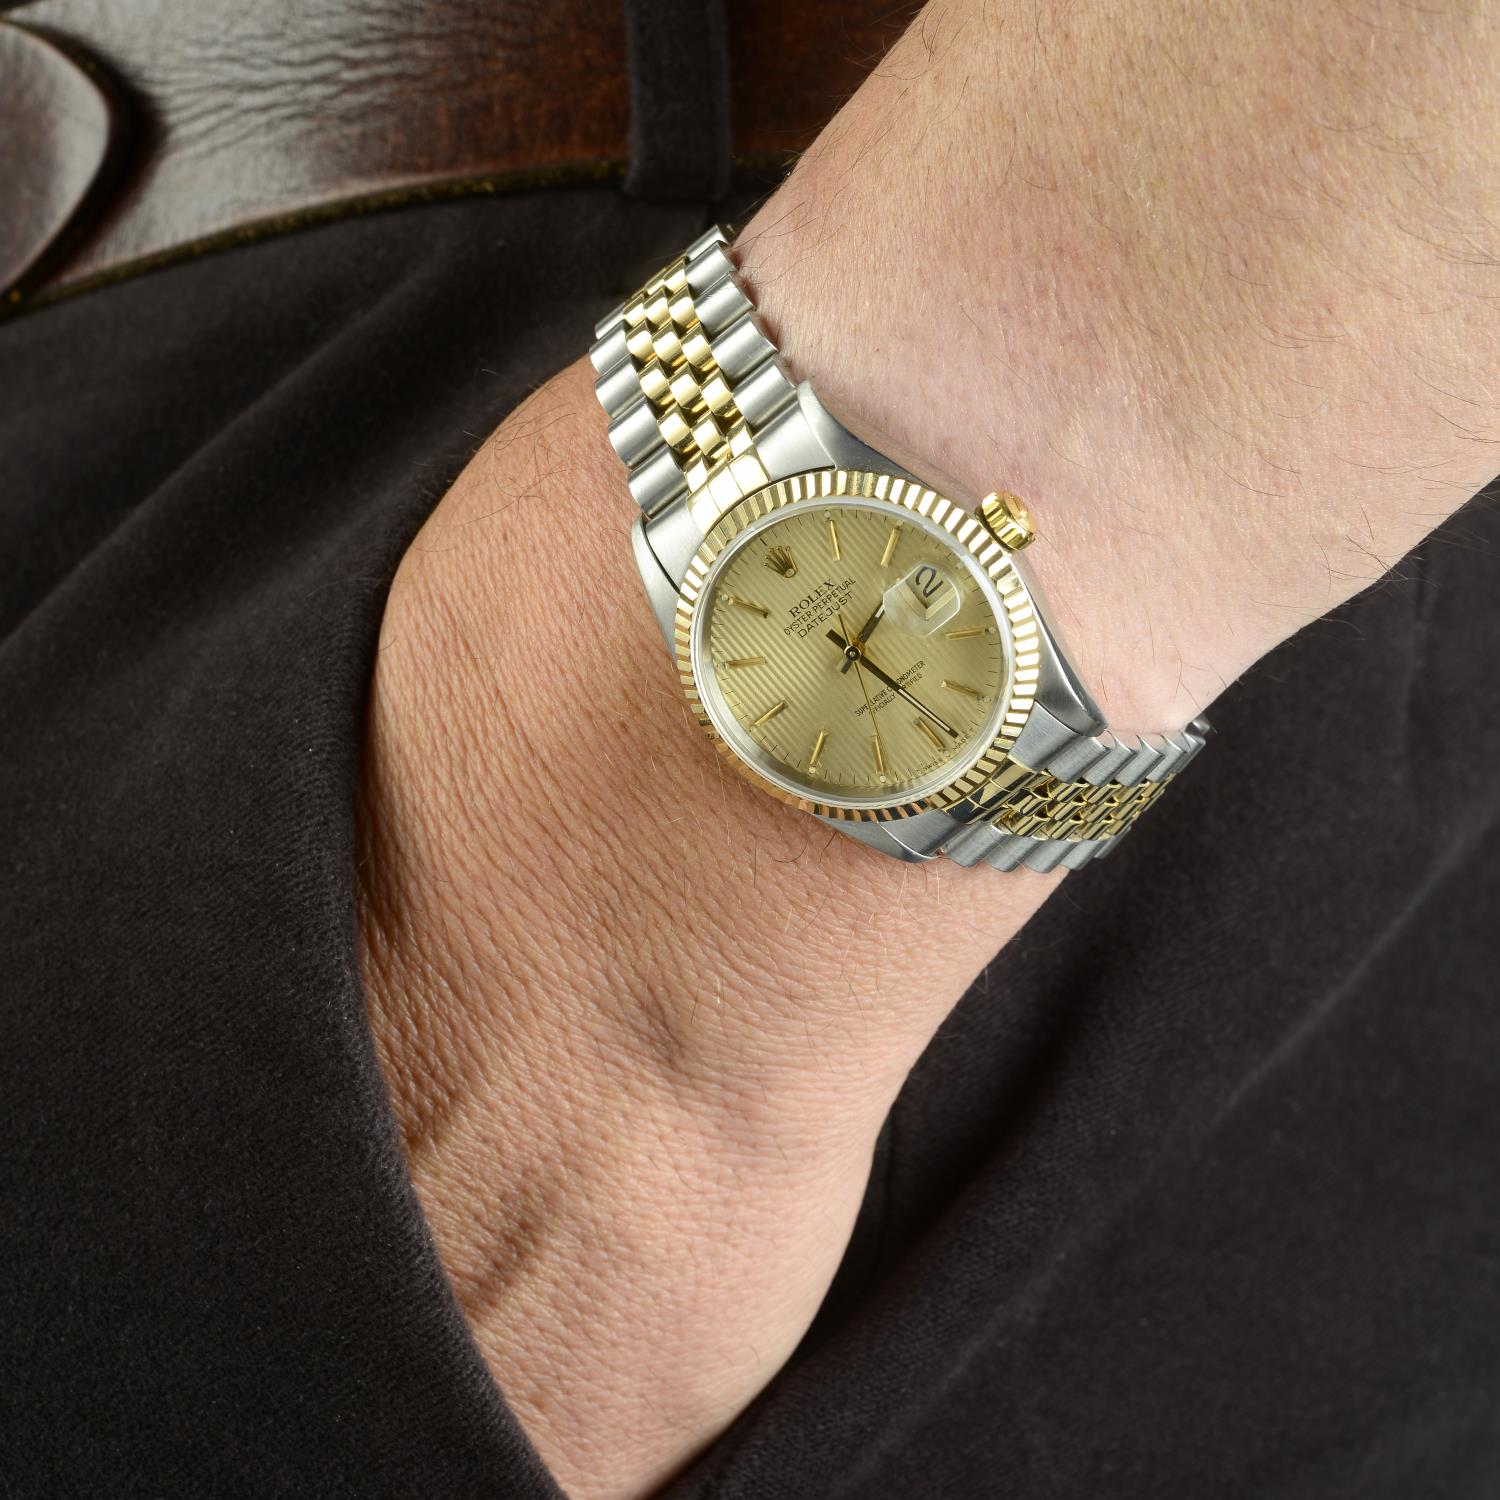 ROLEX - a gentleman's Oyster Perpetual Datejust bracelet watch. - Image 3 of 4